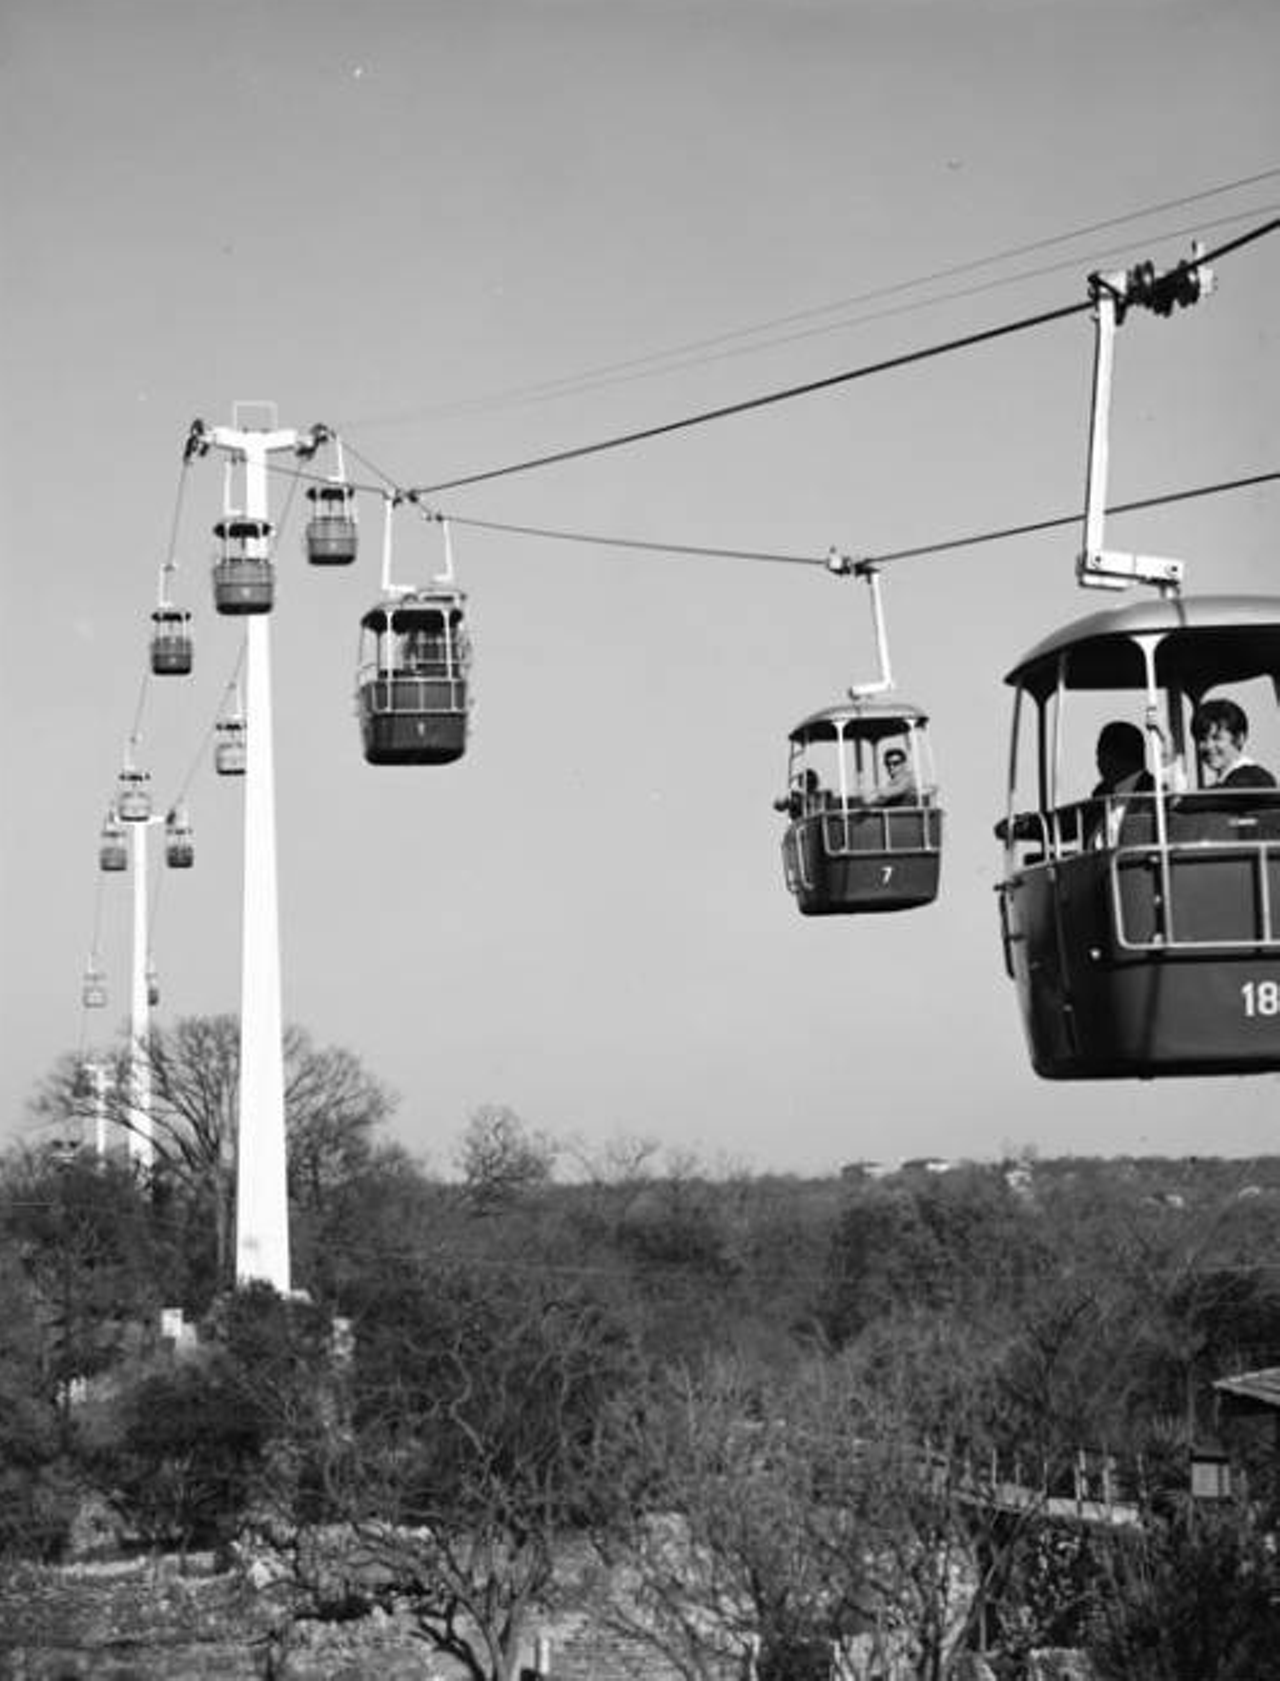 The Sky Ride at Brackenridge Park
San Antonians first got to enjoy the well-loved Sky Ride at Brackenridge Park when the attraction opened on November 14, 1964. Perhaps what locals are most nostalgic about, the ride gave a magical view of the park. Due to maintenance costs, the ride was closed in 1999.
Photo via UTSA Libraries Digital Collections